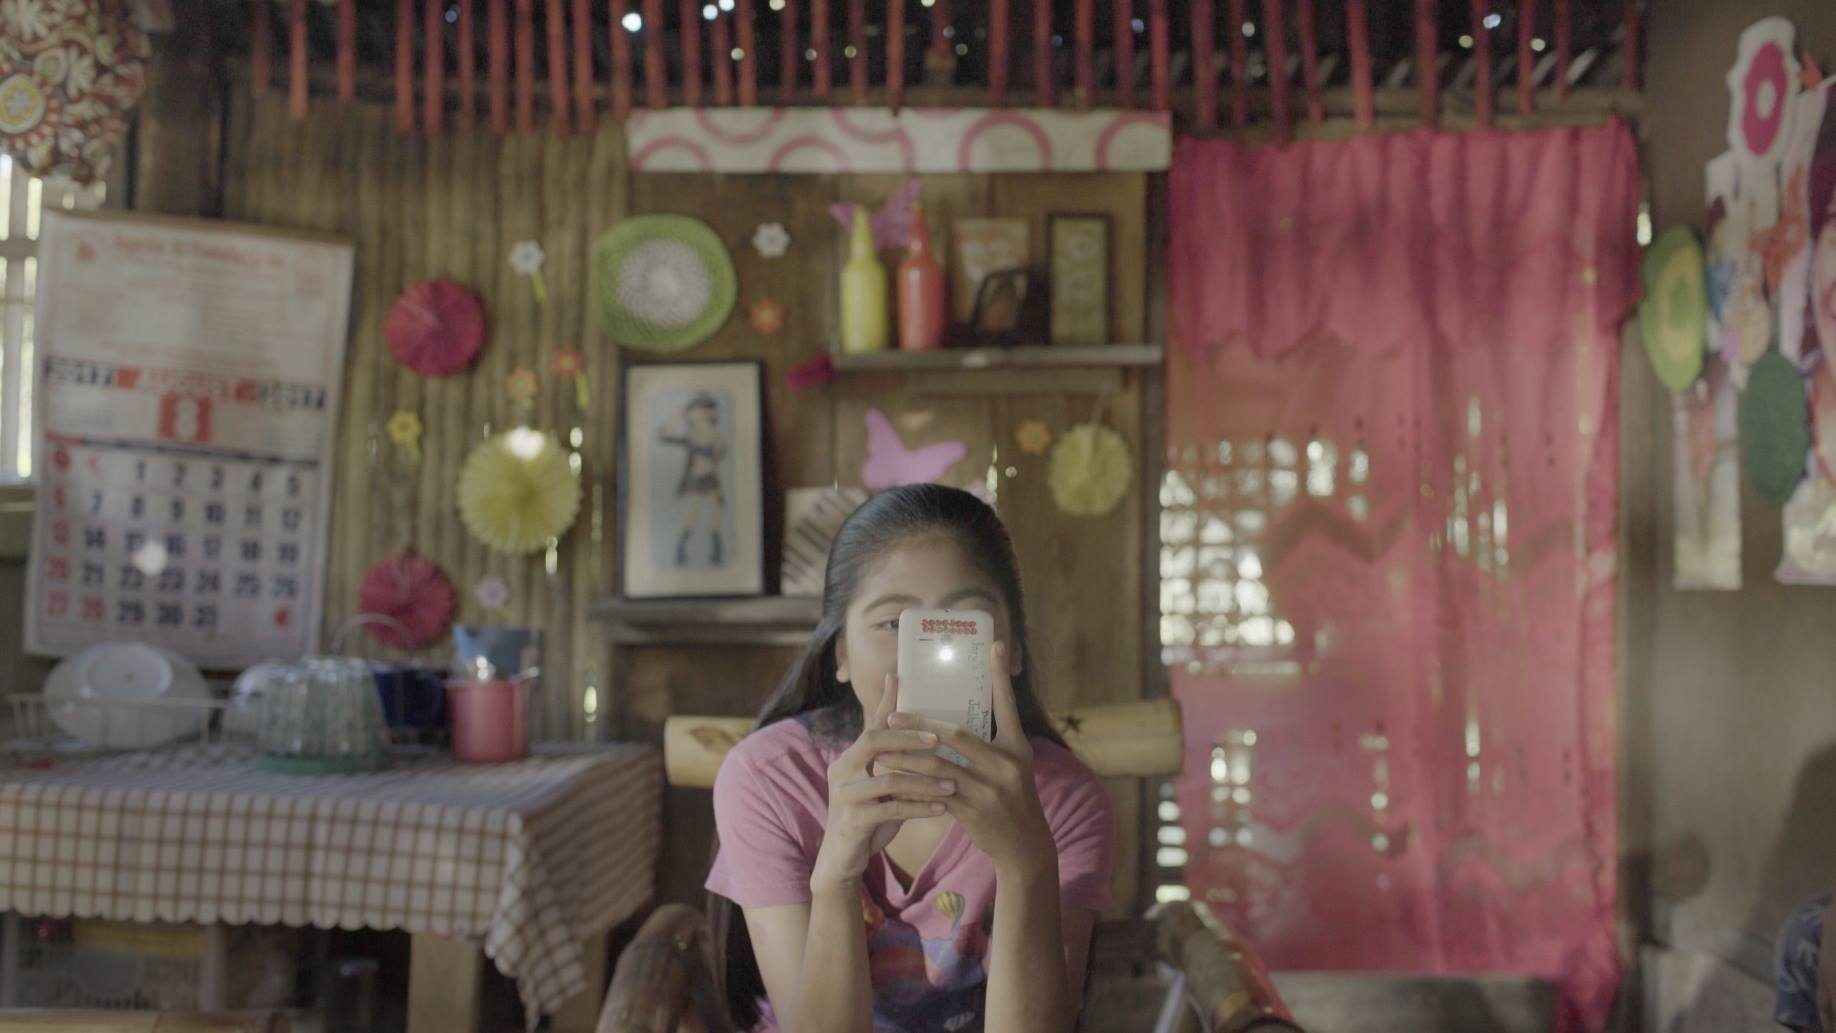 Over 130 homegrown films find home in Iloilo’s regional film festival